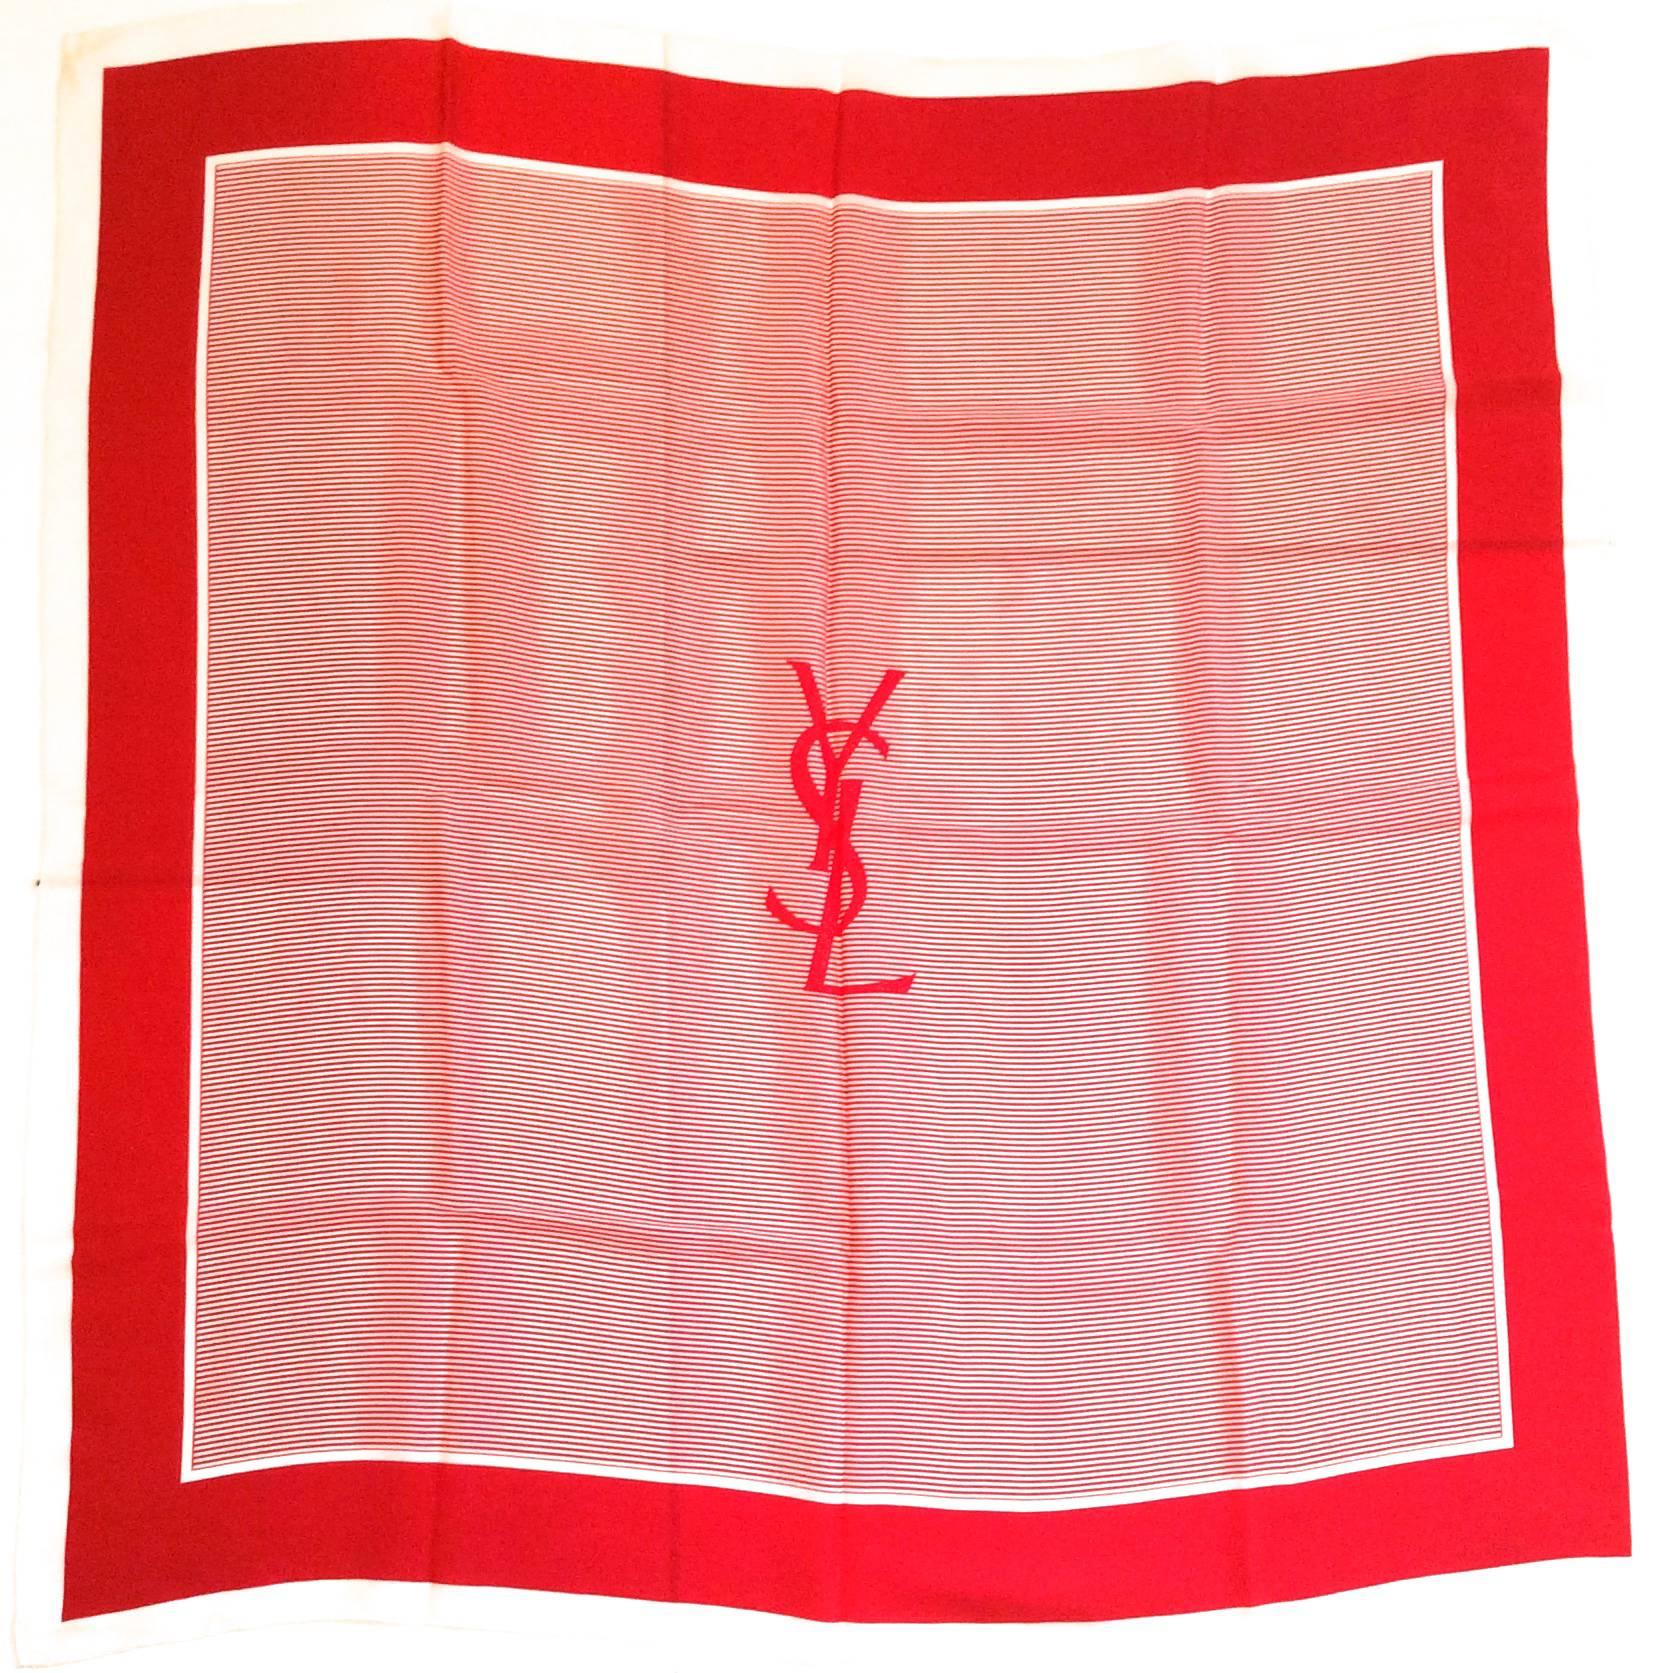 Yves Saint Laurent / YSL - 100% Silk Scarf - 1970's - Red and White For Sale